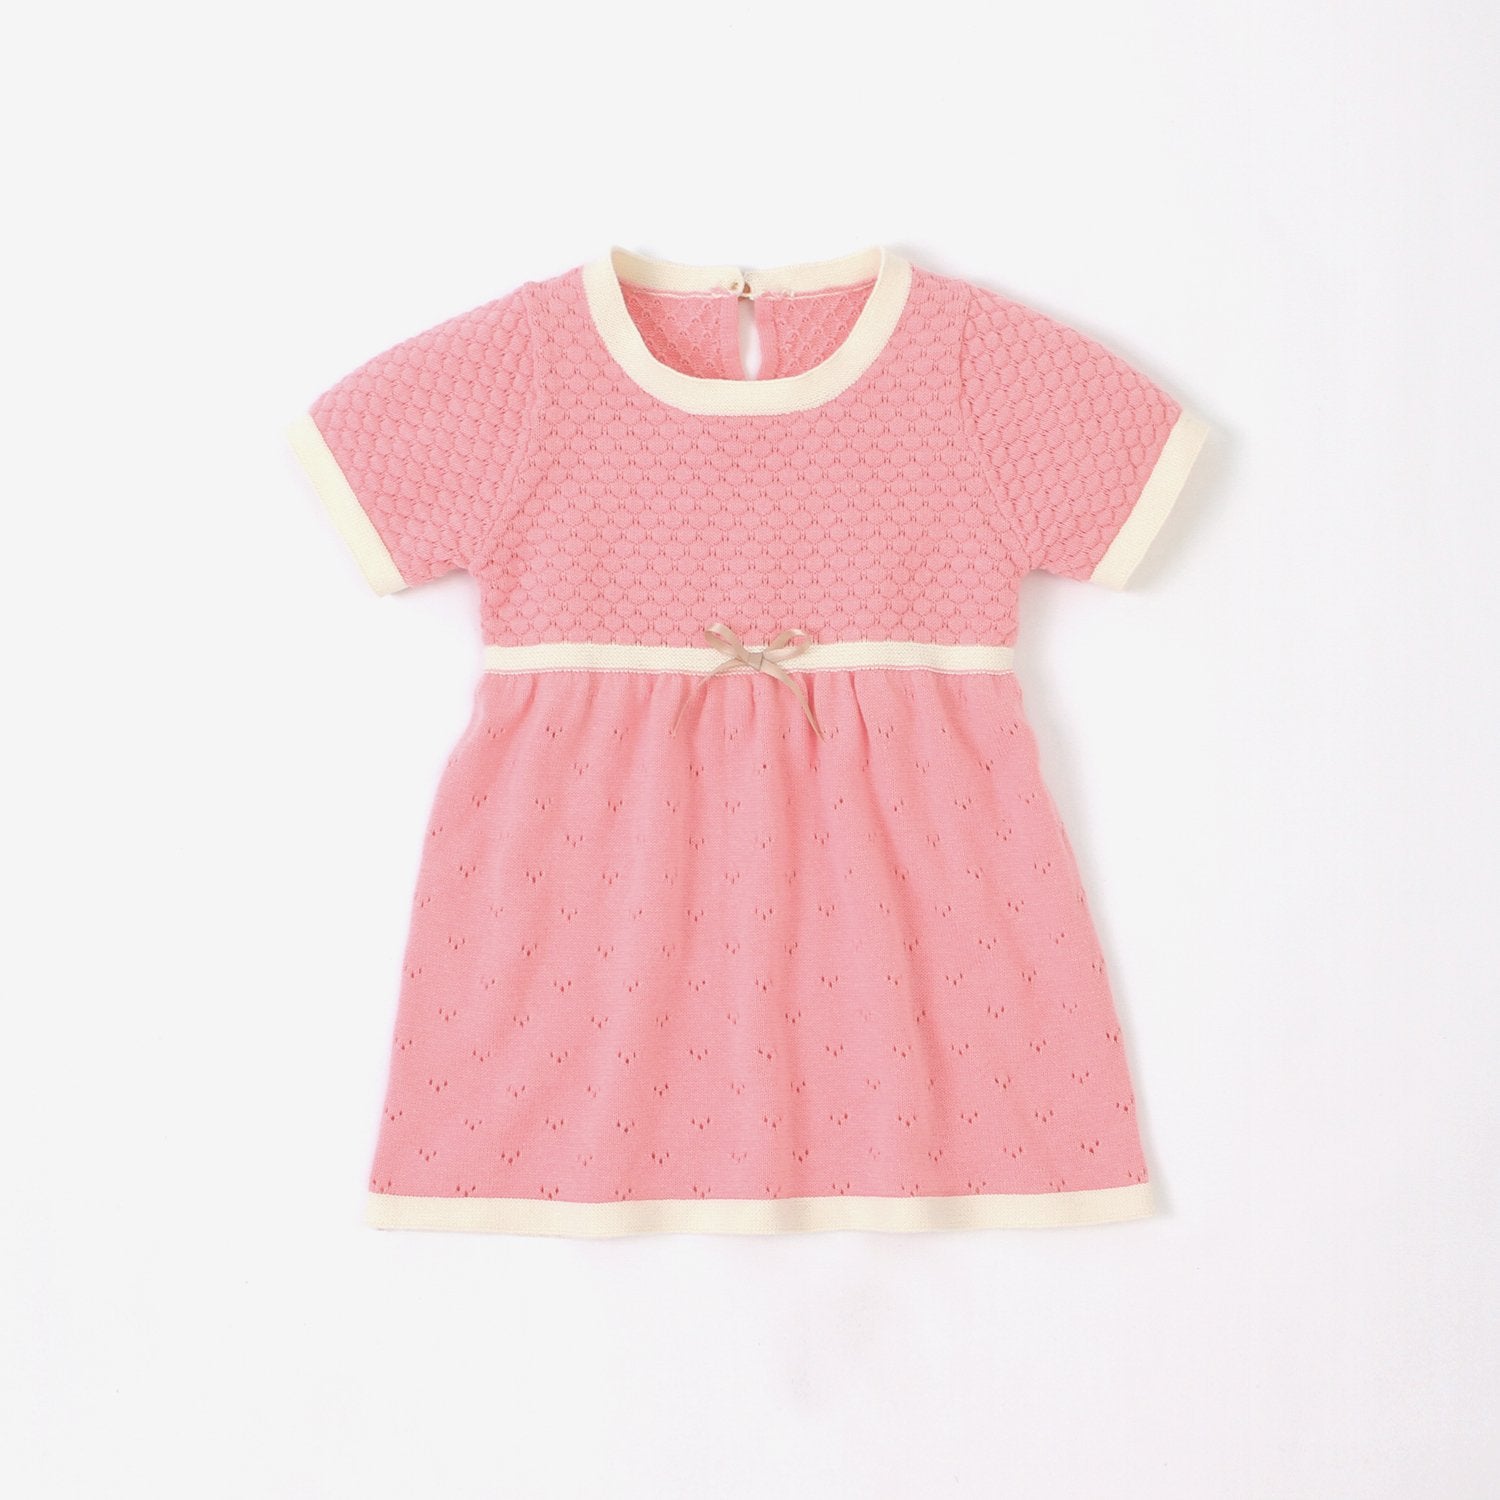 Girls Spring And Autumn Solid Cotton Short Sleeve Dress Girls Wholesale Dresses